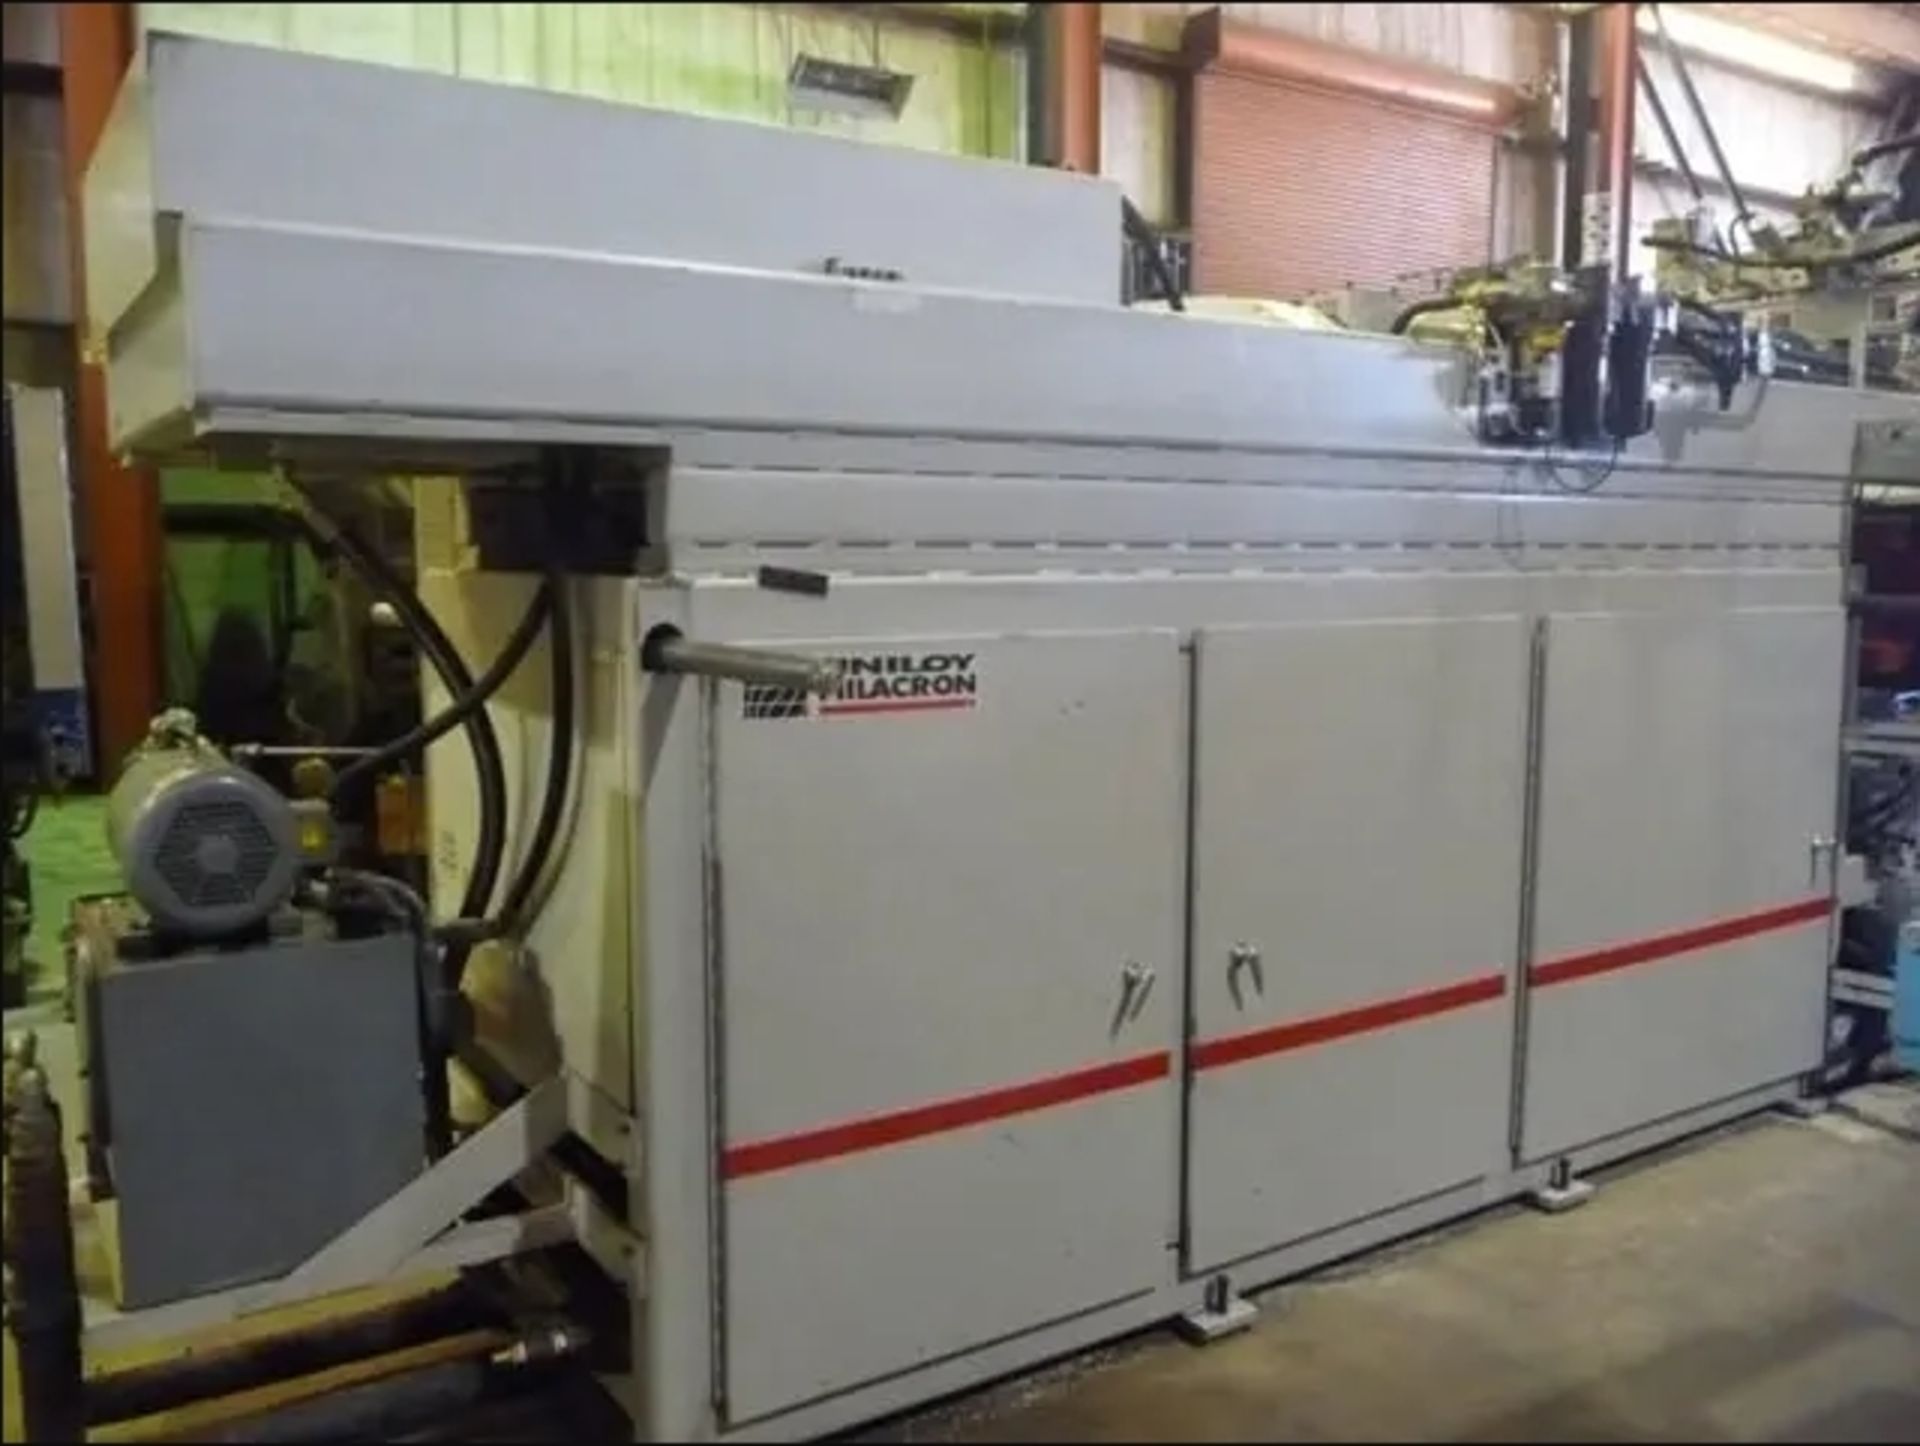 2005 Uniloy R2000, Blow Molder with (2) Heads - Image 3 of 18